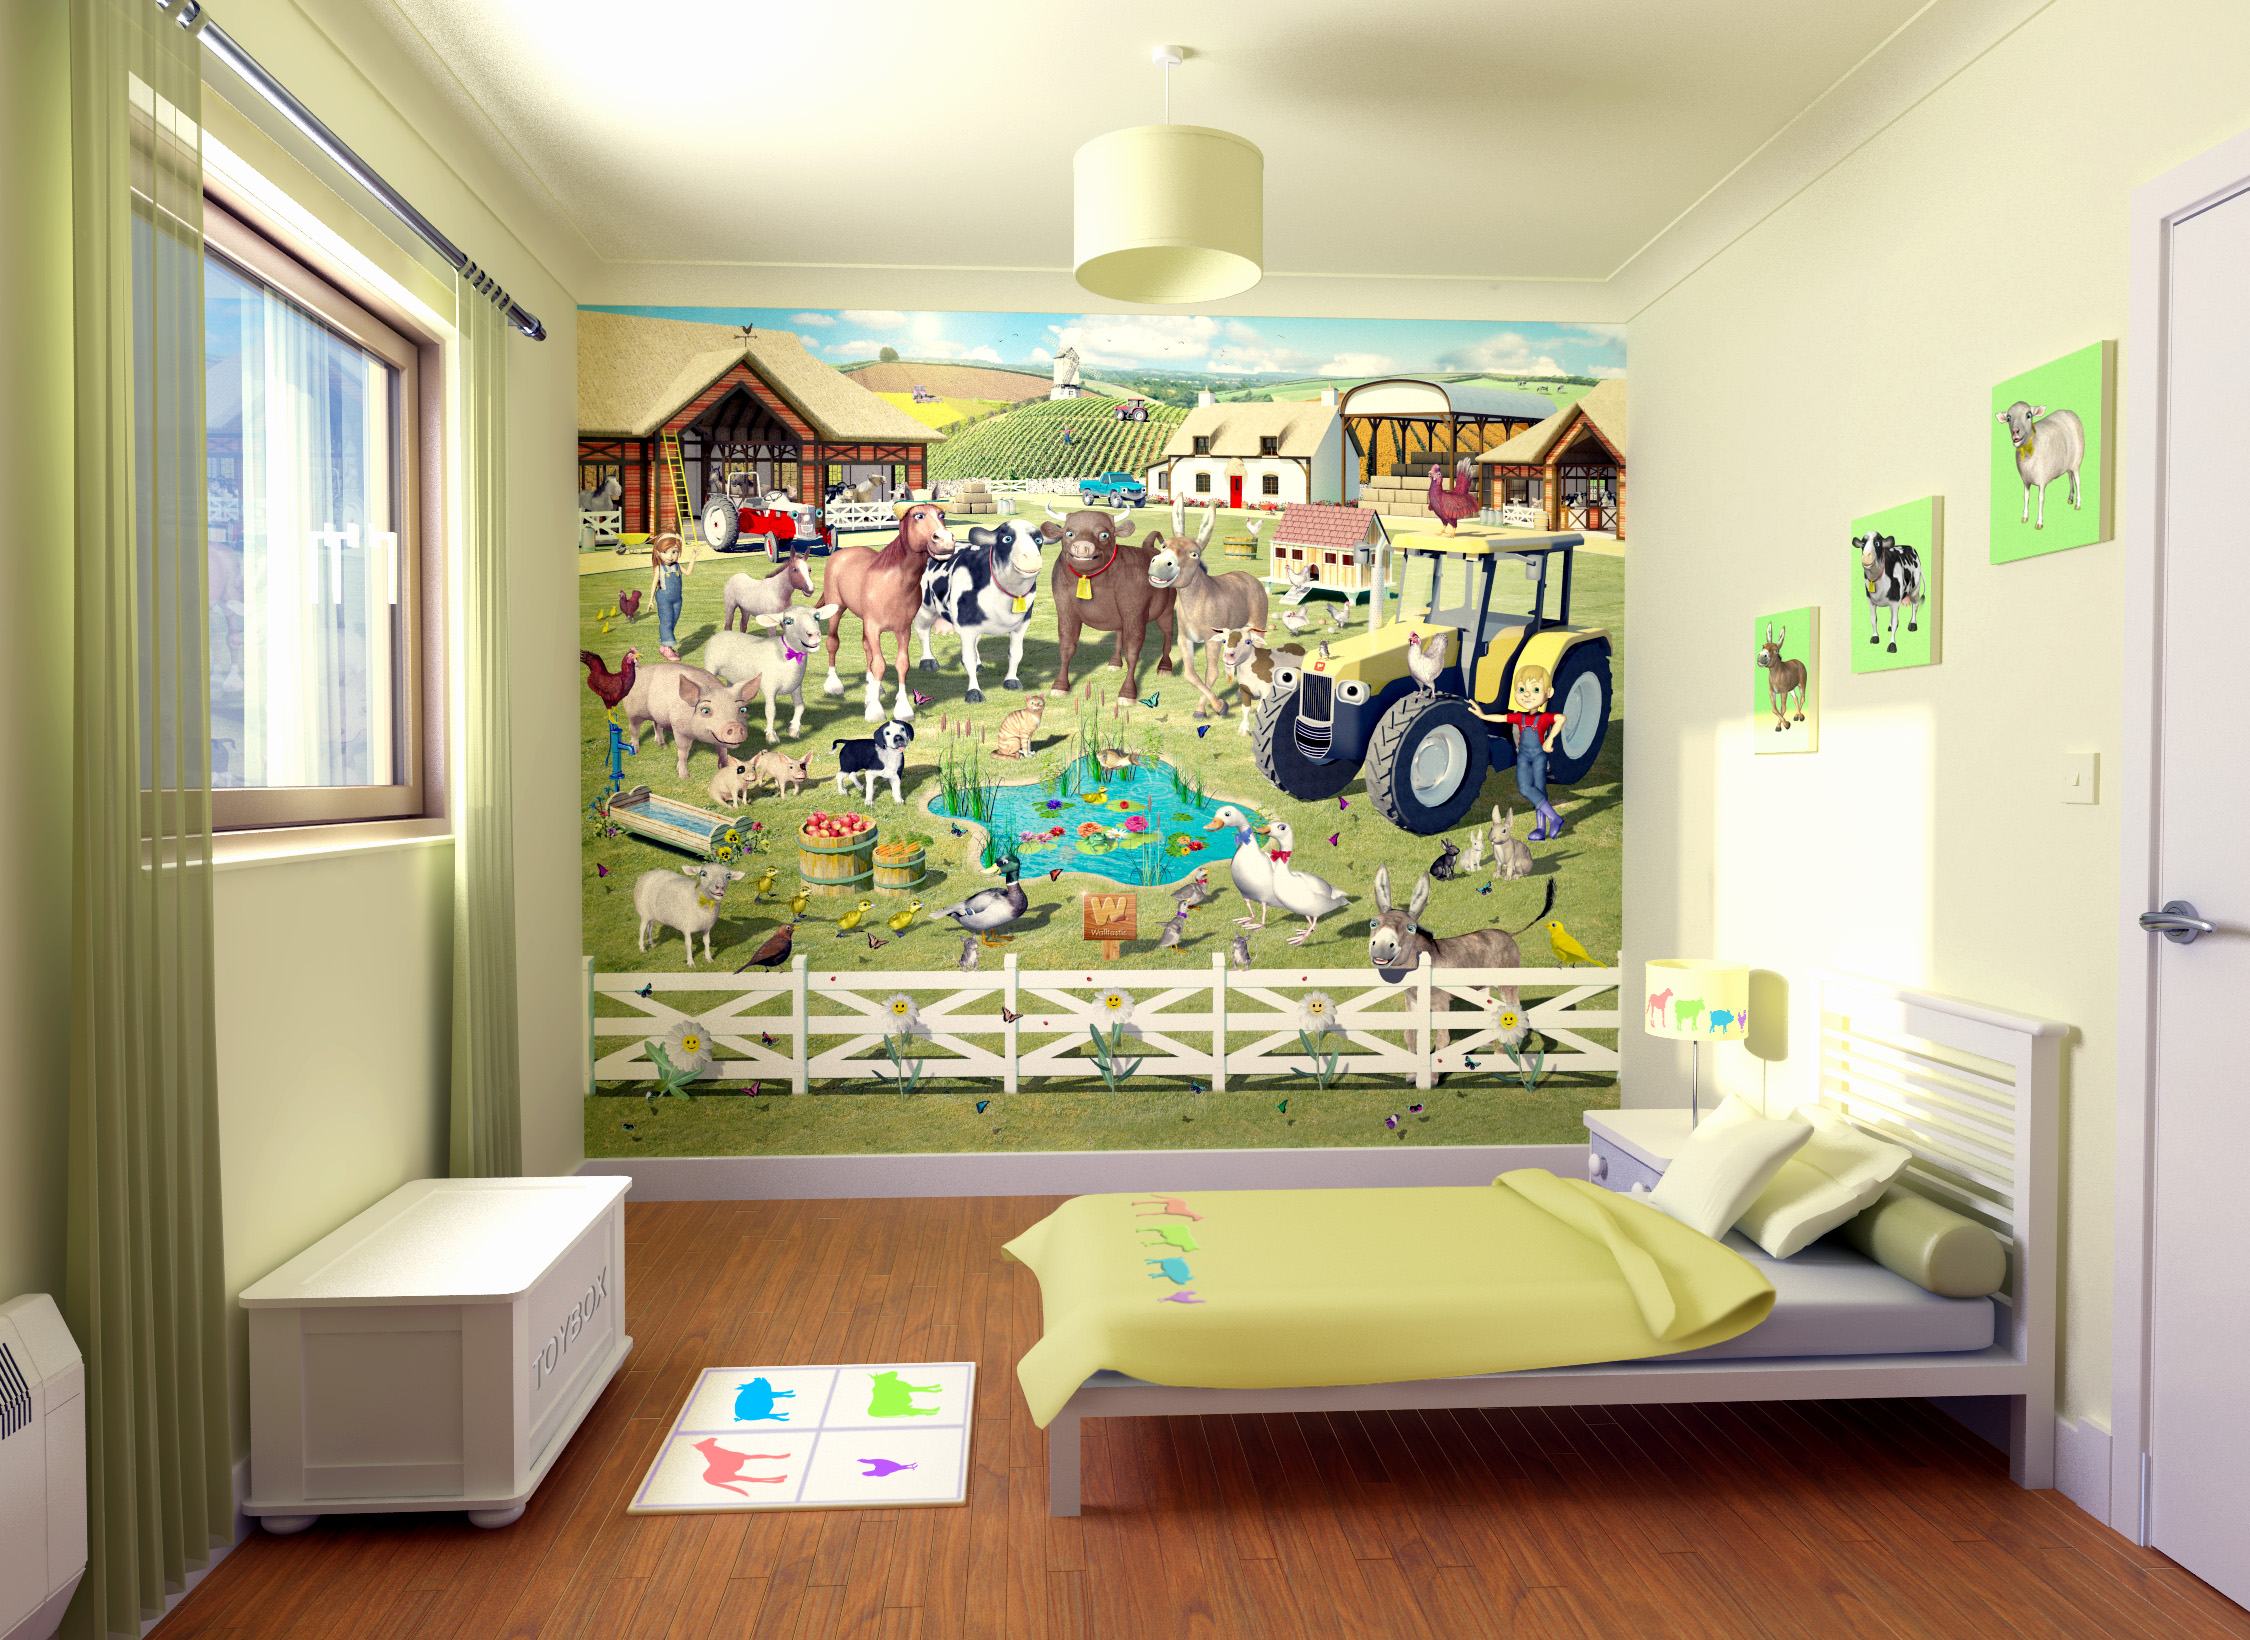 fascinating-farmhouse-kids-room-wallpaper-with-green-cartridge-pleat-window-curtain-panel-and-white-lacquer-finish-wooden-bench-plus-single-bed-above-dark-brown-solid-wood-floor